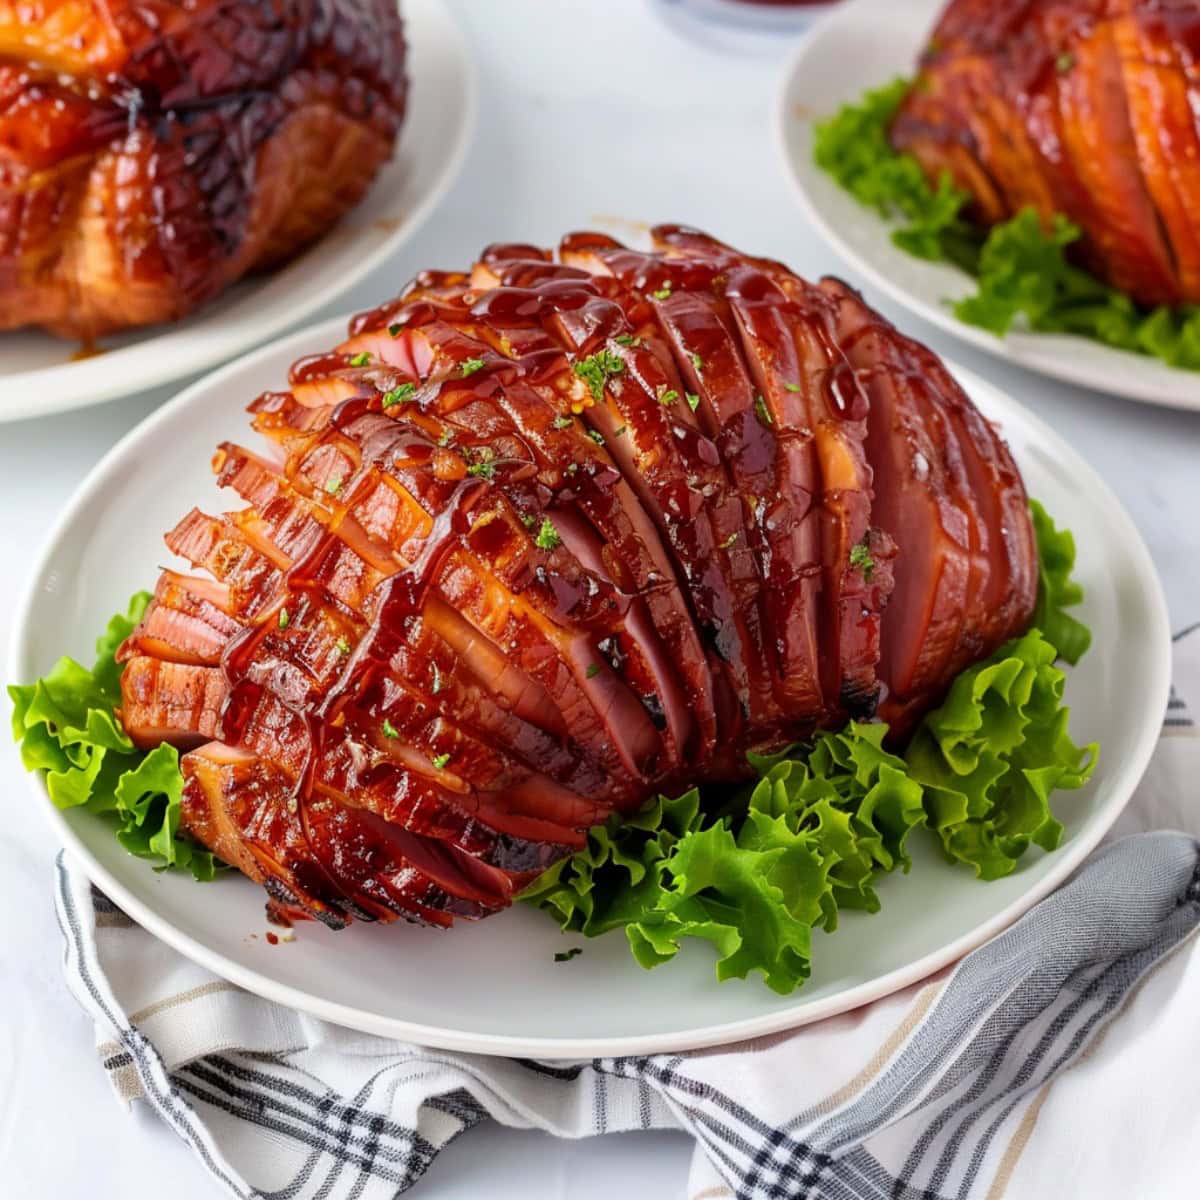 Tender and juicy Coca-Cola Glazed ham served with lettuce in a white plate